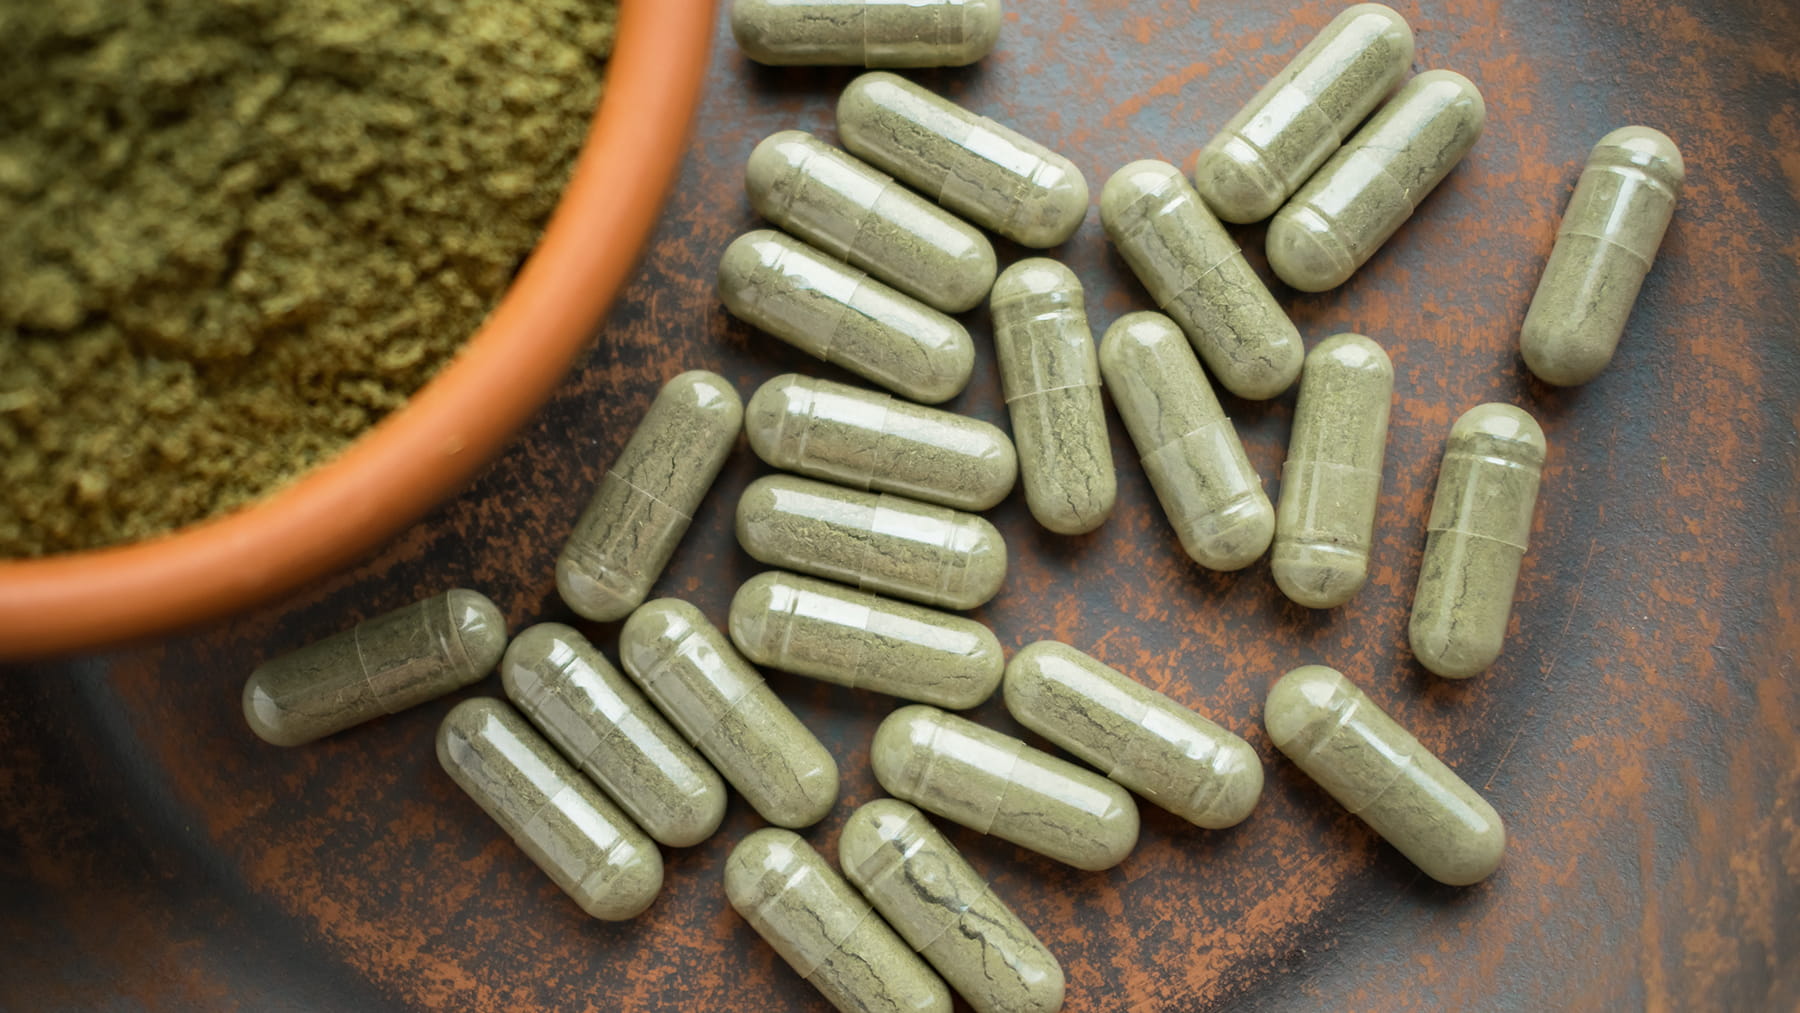 Be wary of plant-based drug kratom, experts say